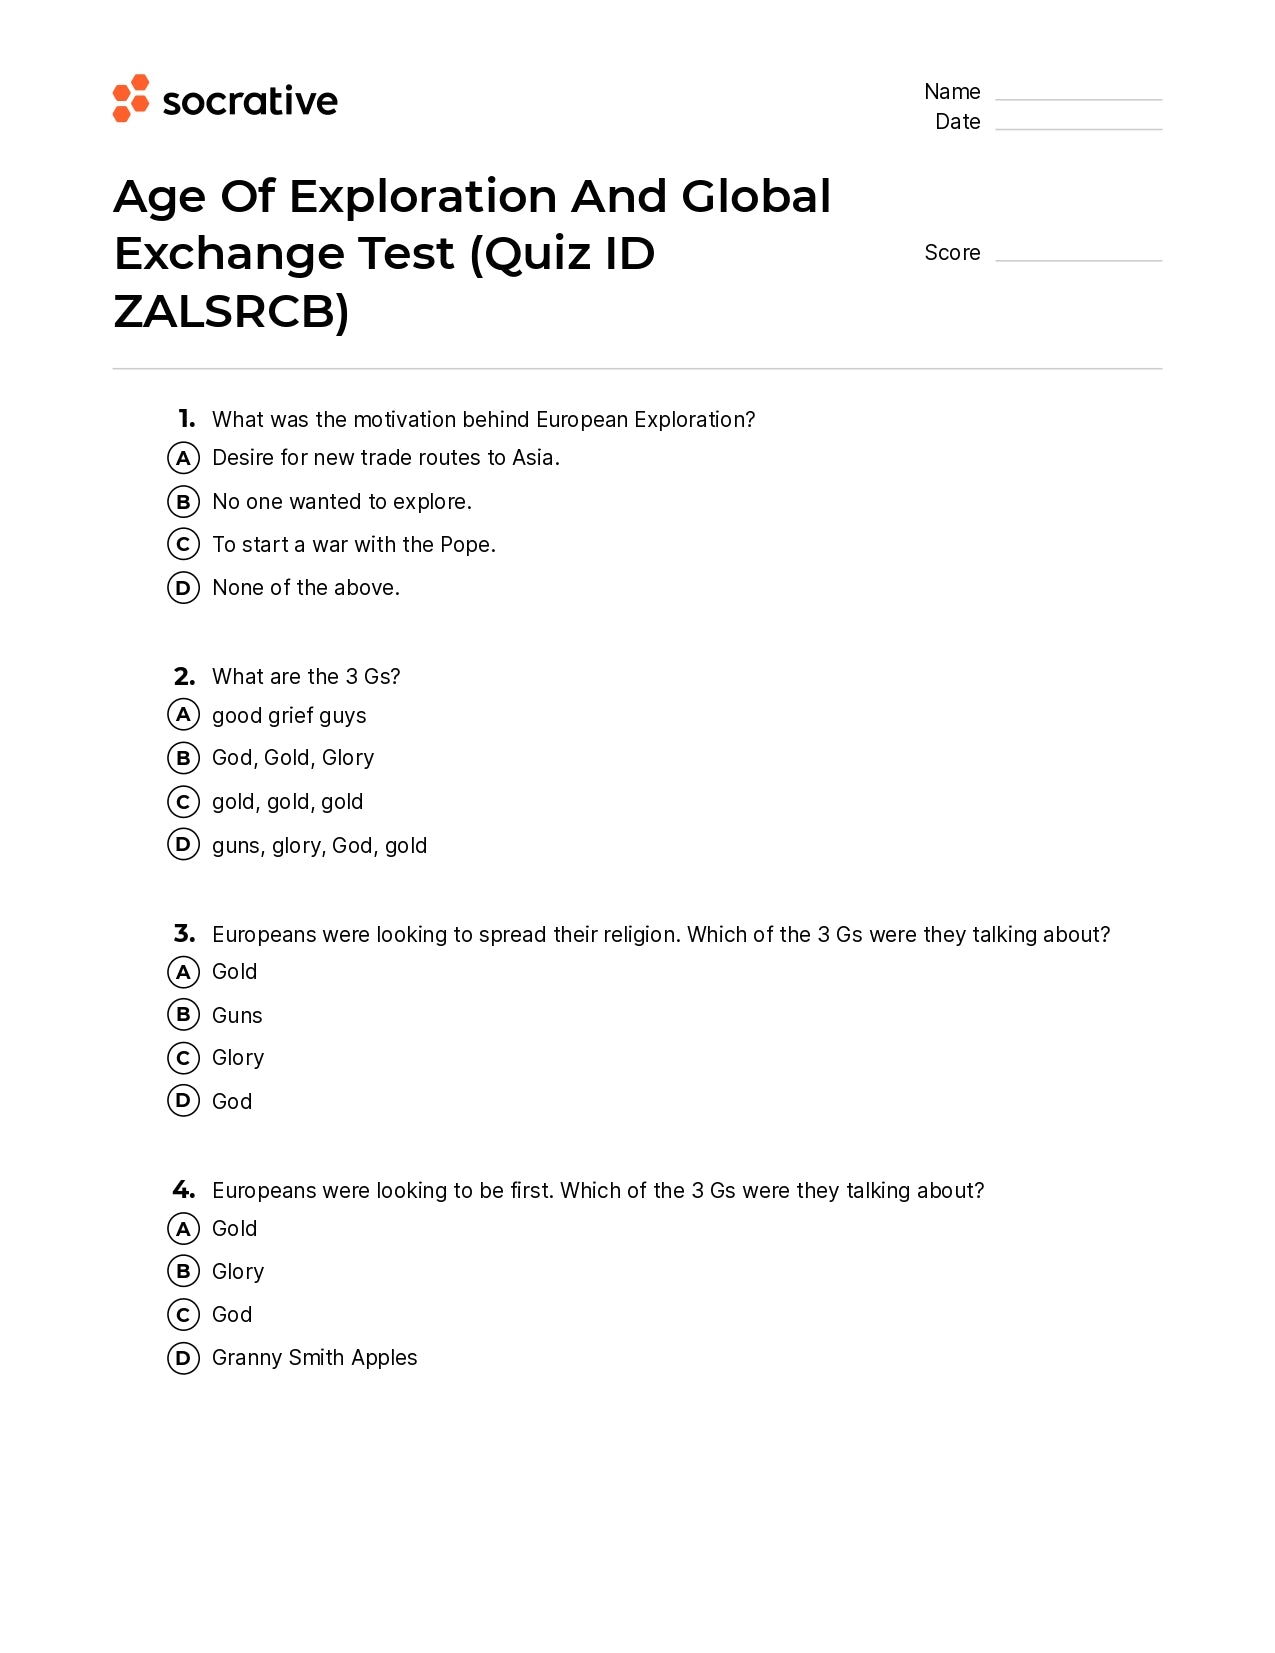 Age Of Exploration And Global Exchange Test